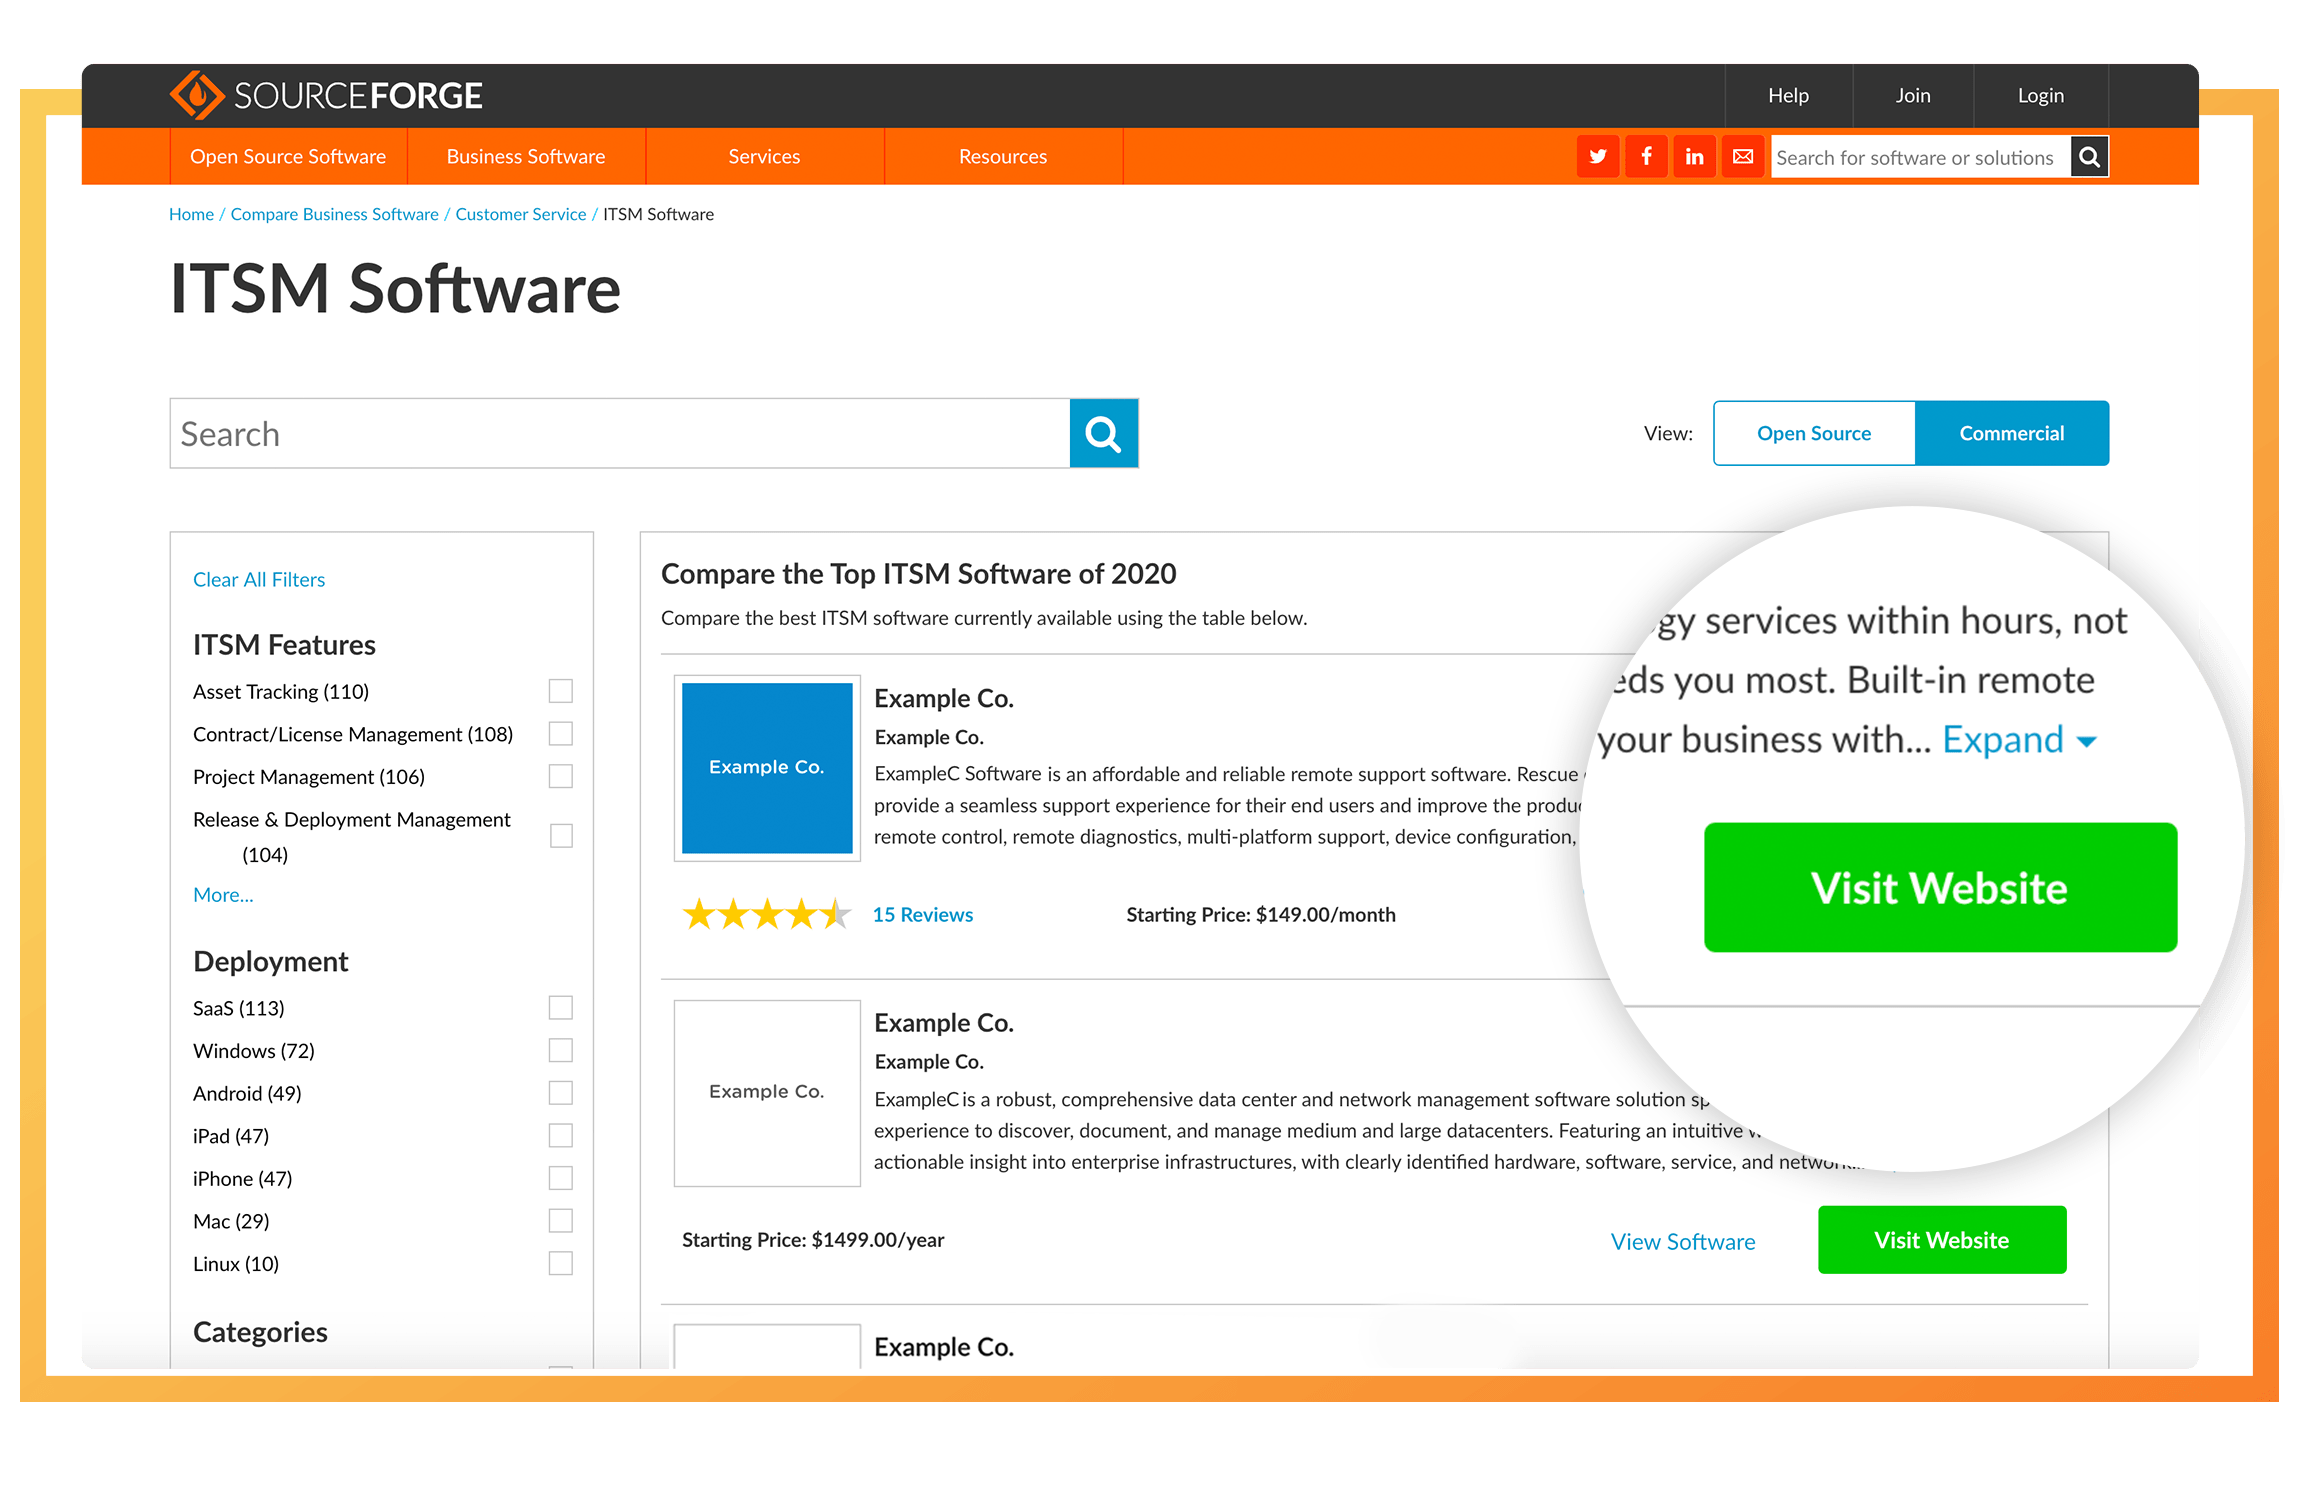 SourceForge Software Category Placement example